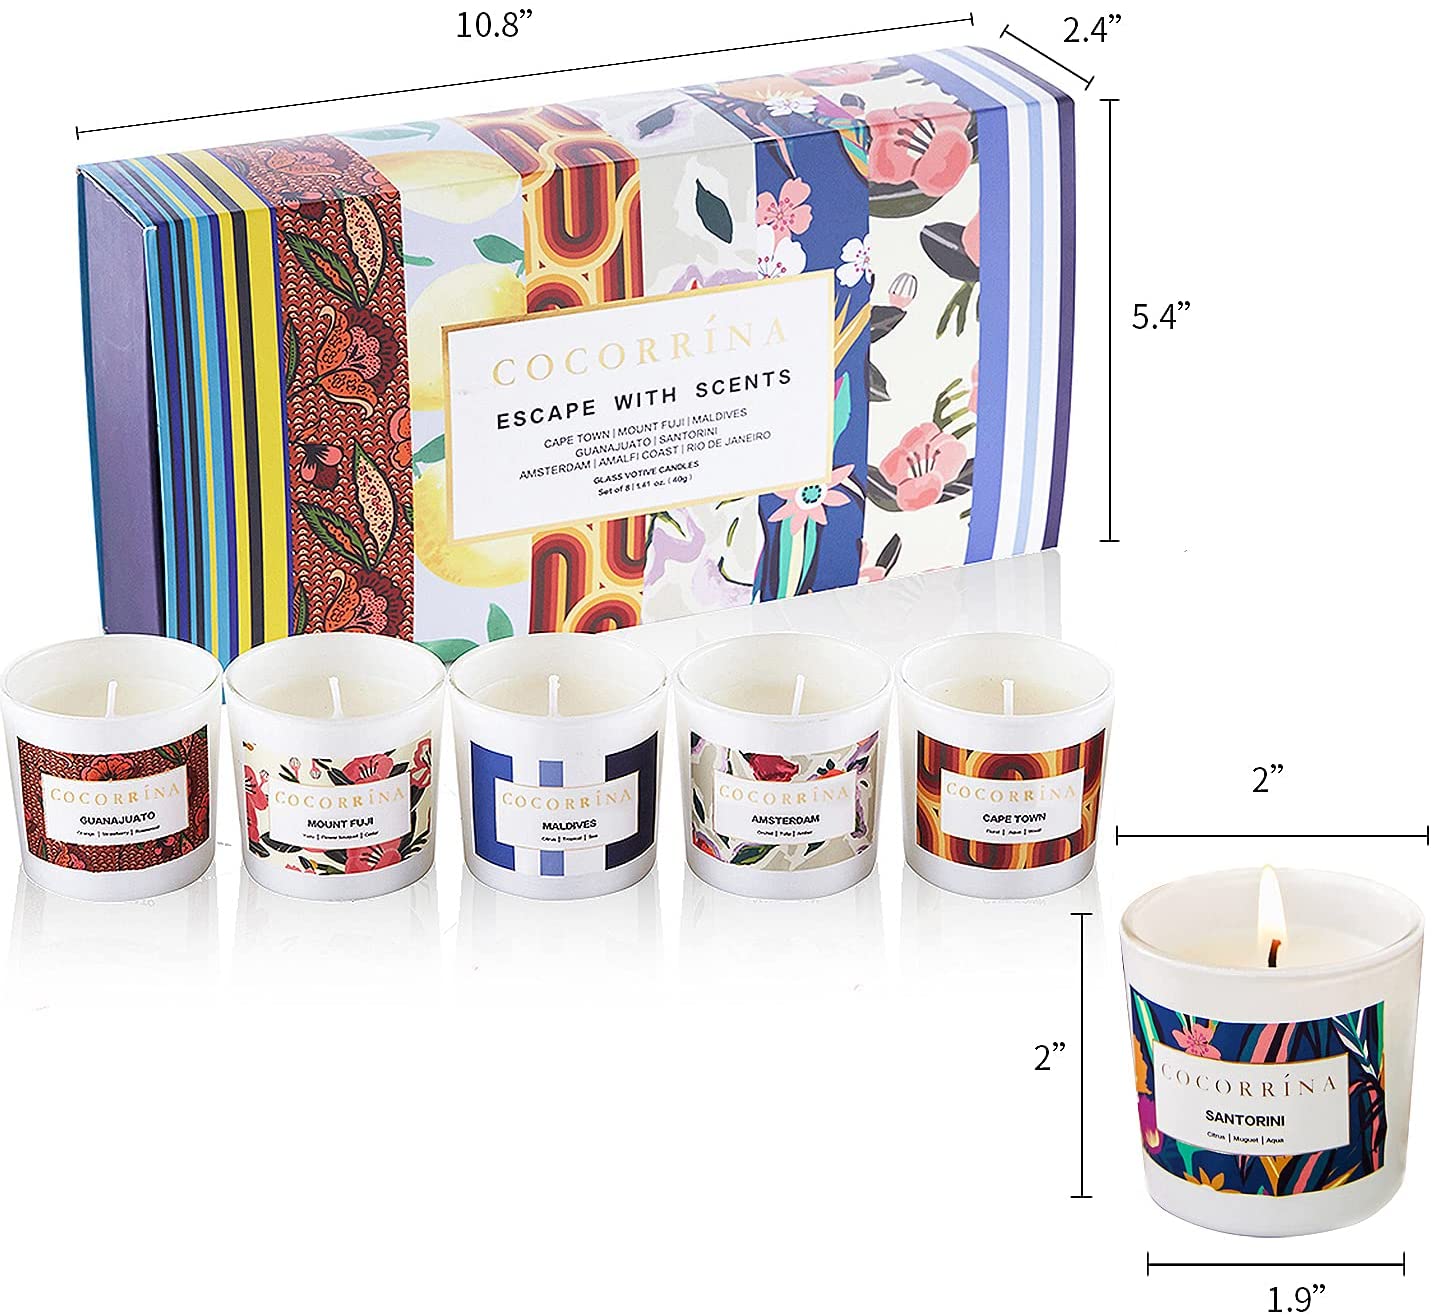 Cocorrina Strong Scented Candle Set of 8:Fruity,Floral,Citrus,Woody,Oriental,Aquatic ,Spicy,Green Scented Aromatherapy Soy Wax Candle Gift Set